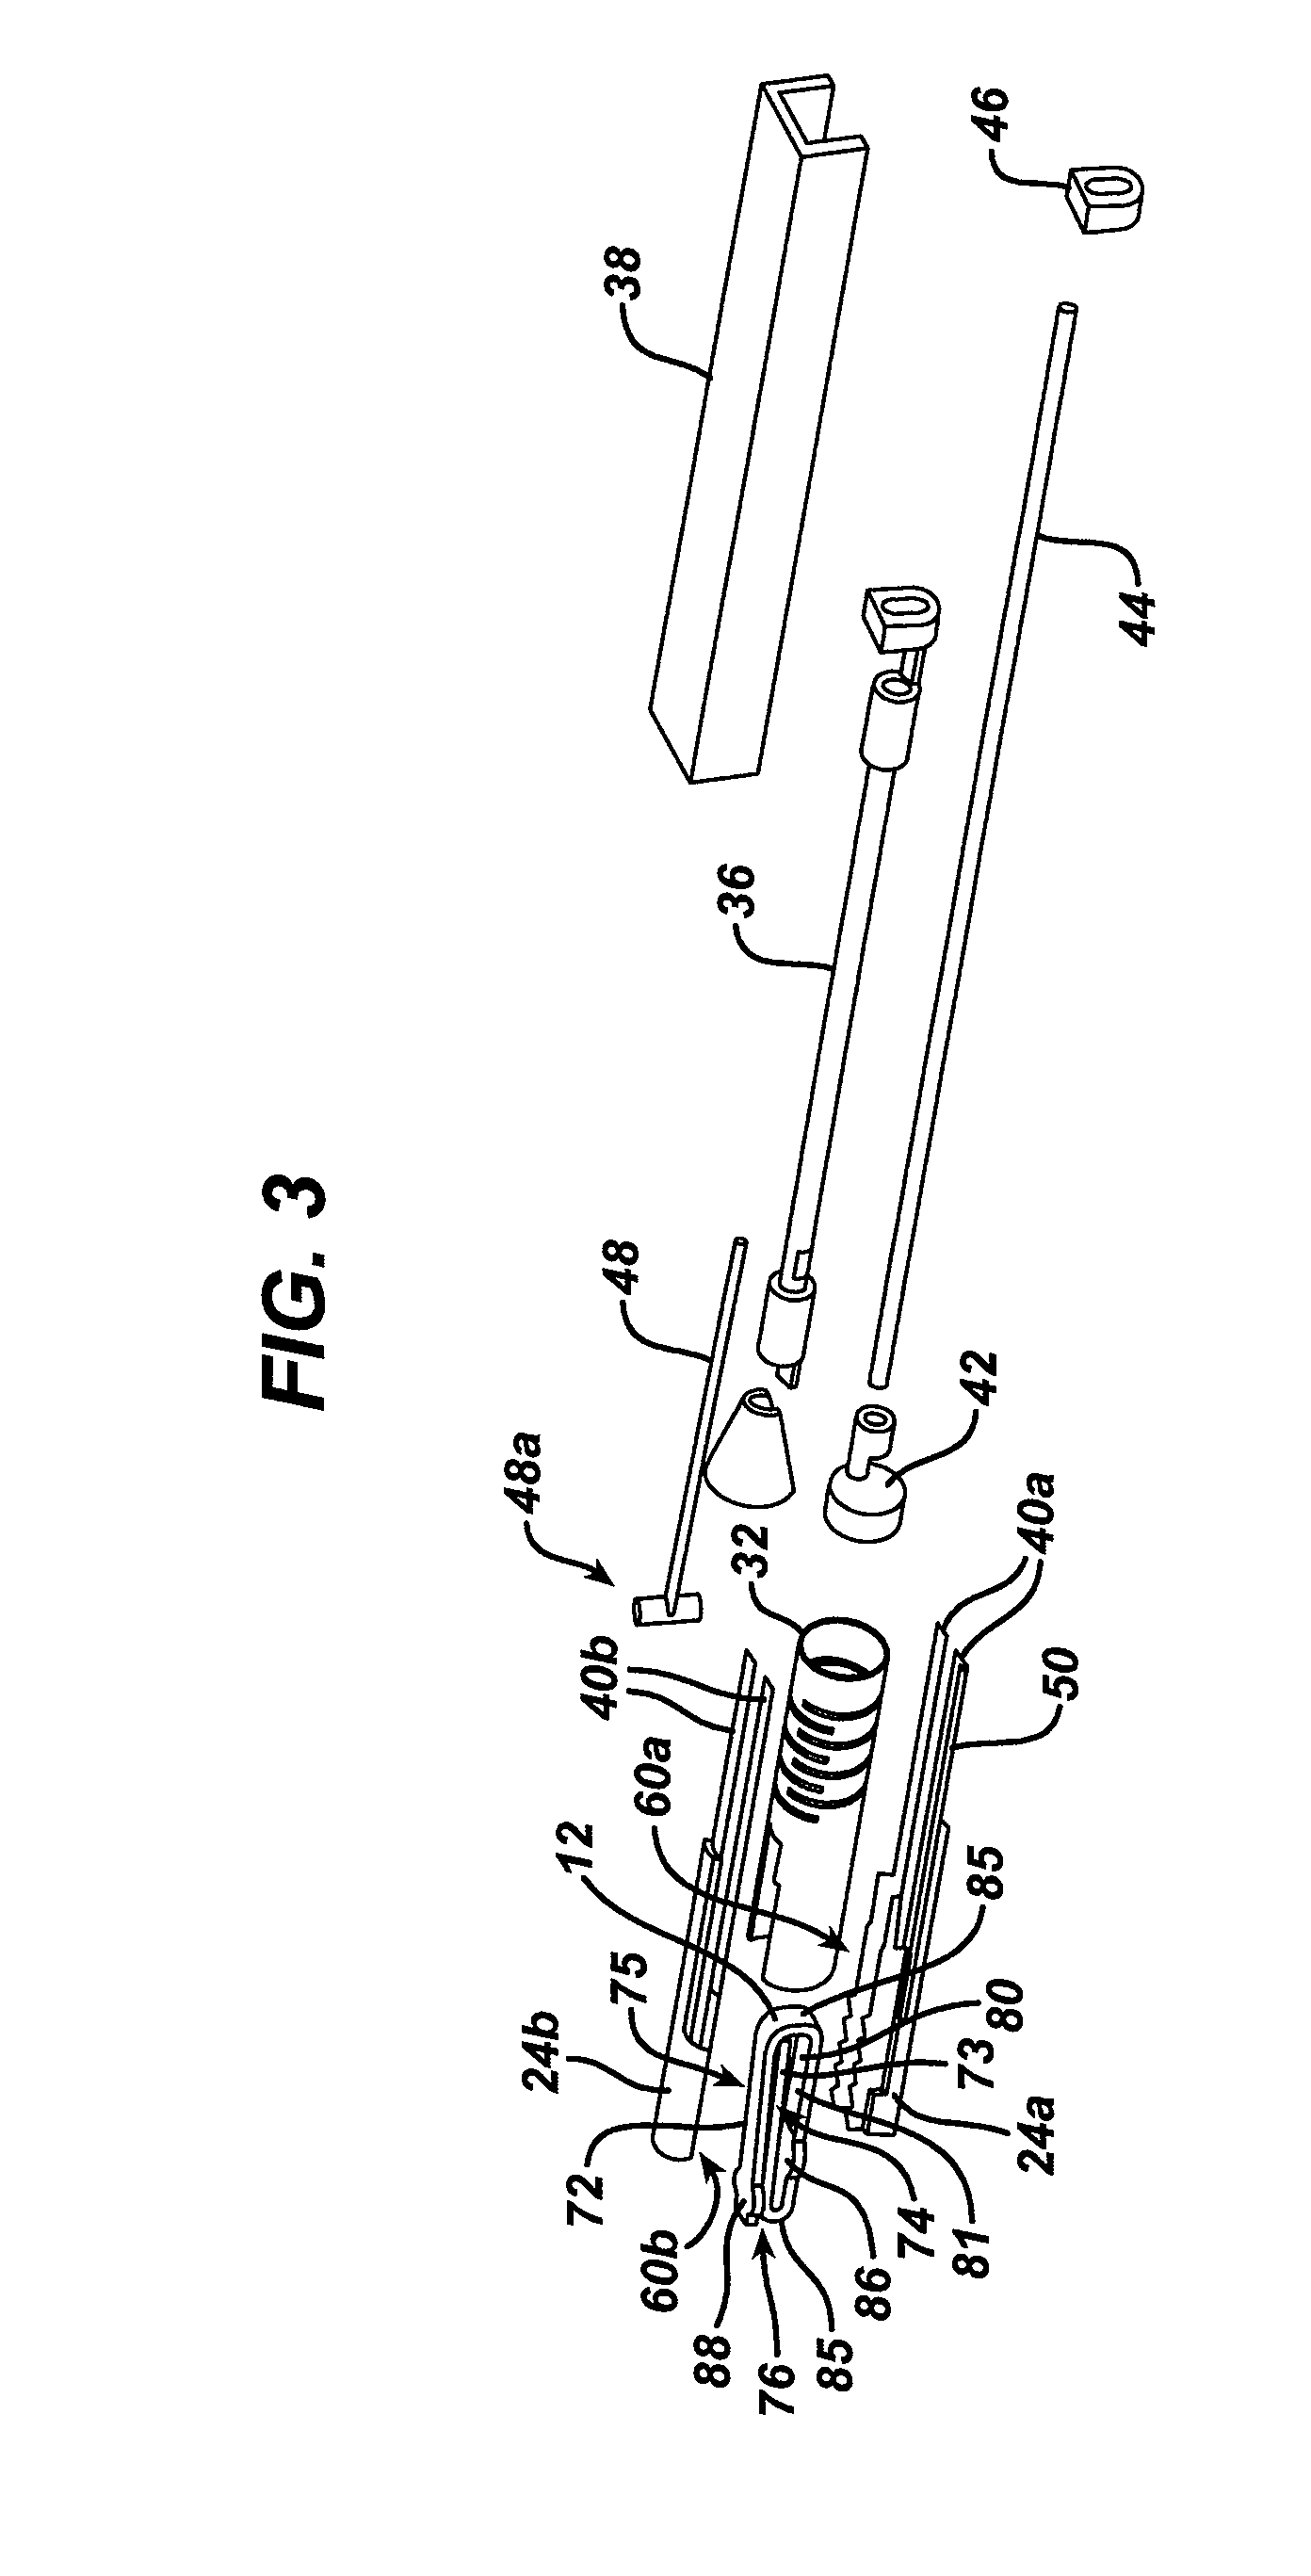 Devices and methods for placing occlusion fastners